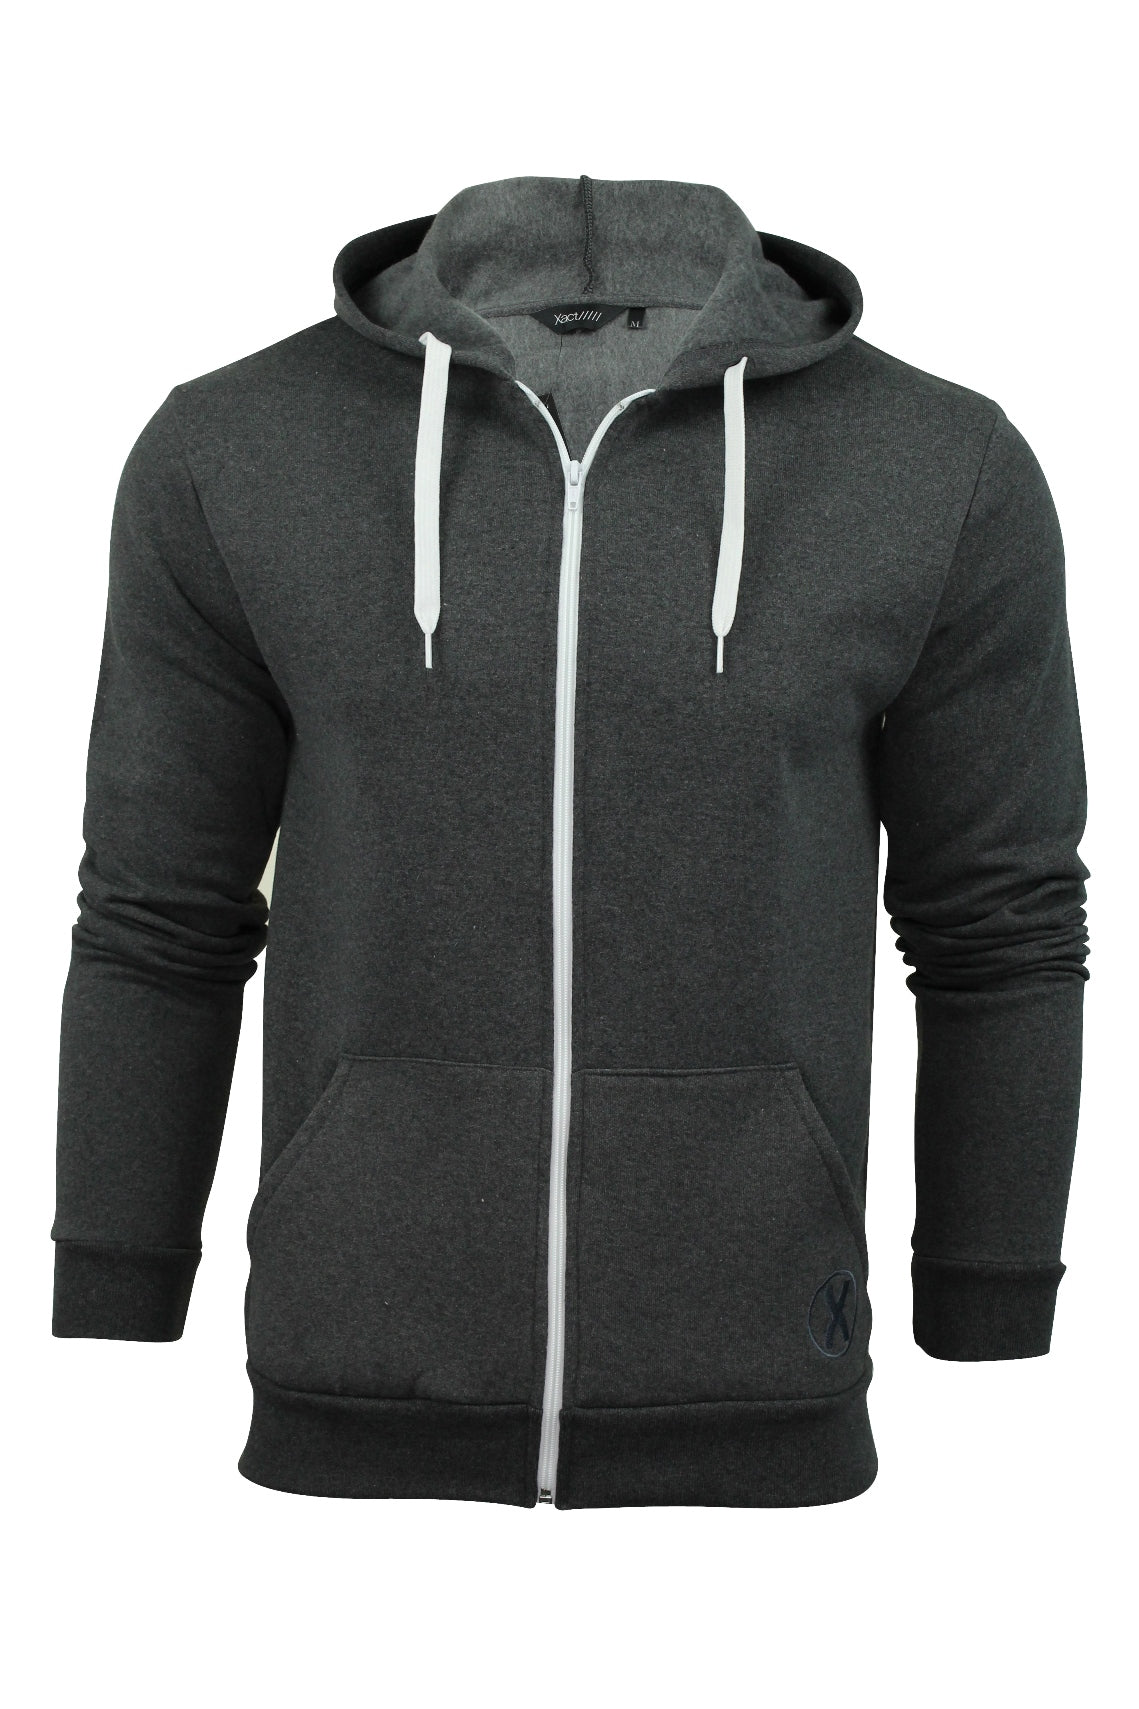 Mens Hoodie Sweat-Top by Xact Clothing Made in England (Charcoal)-Main Image